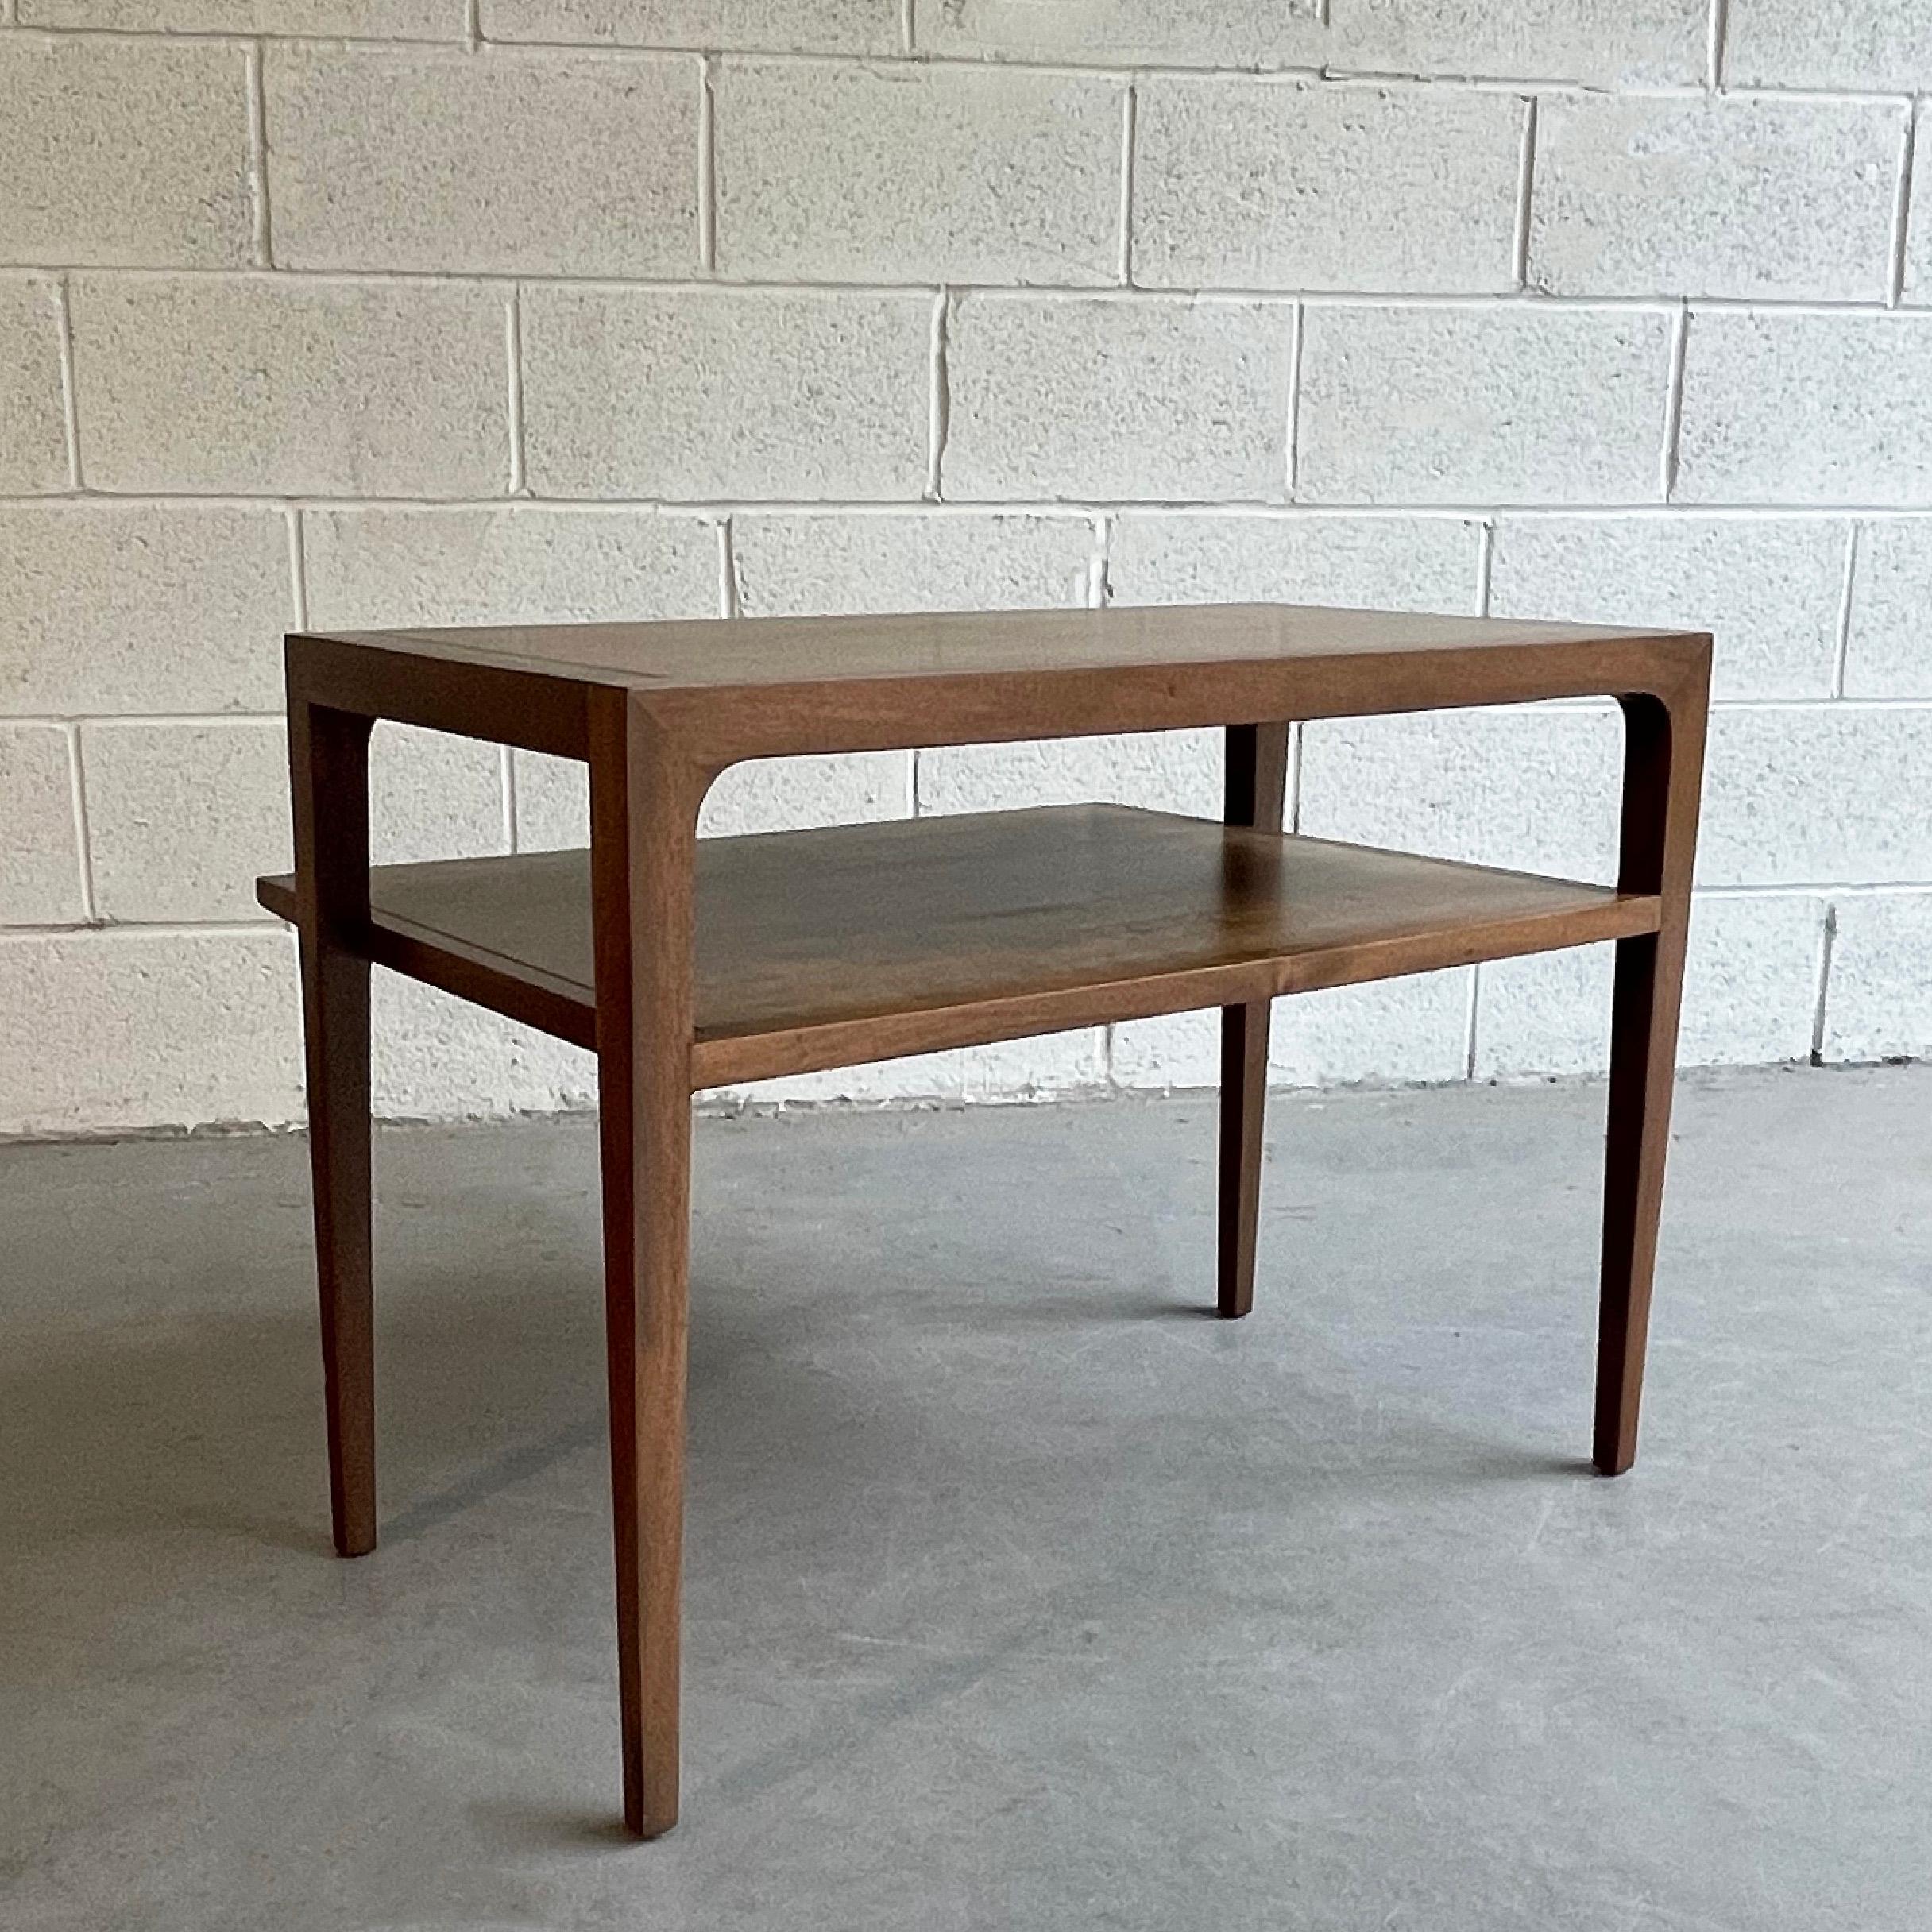 Mid-Century Modern Ash Side Table by John Van Koert for Drexel In Good Condition For Sale In Brooklyn, NY